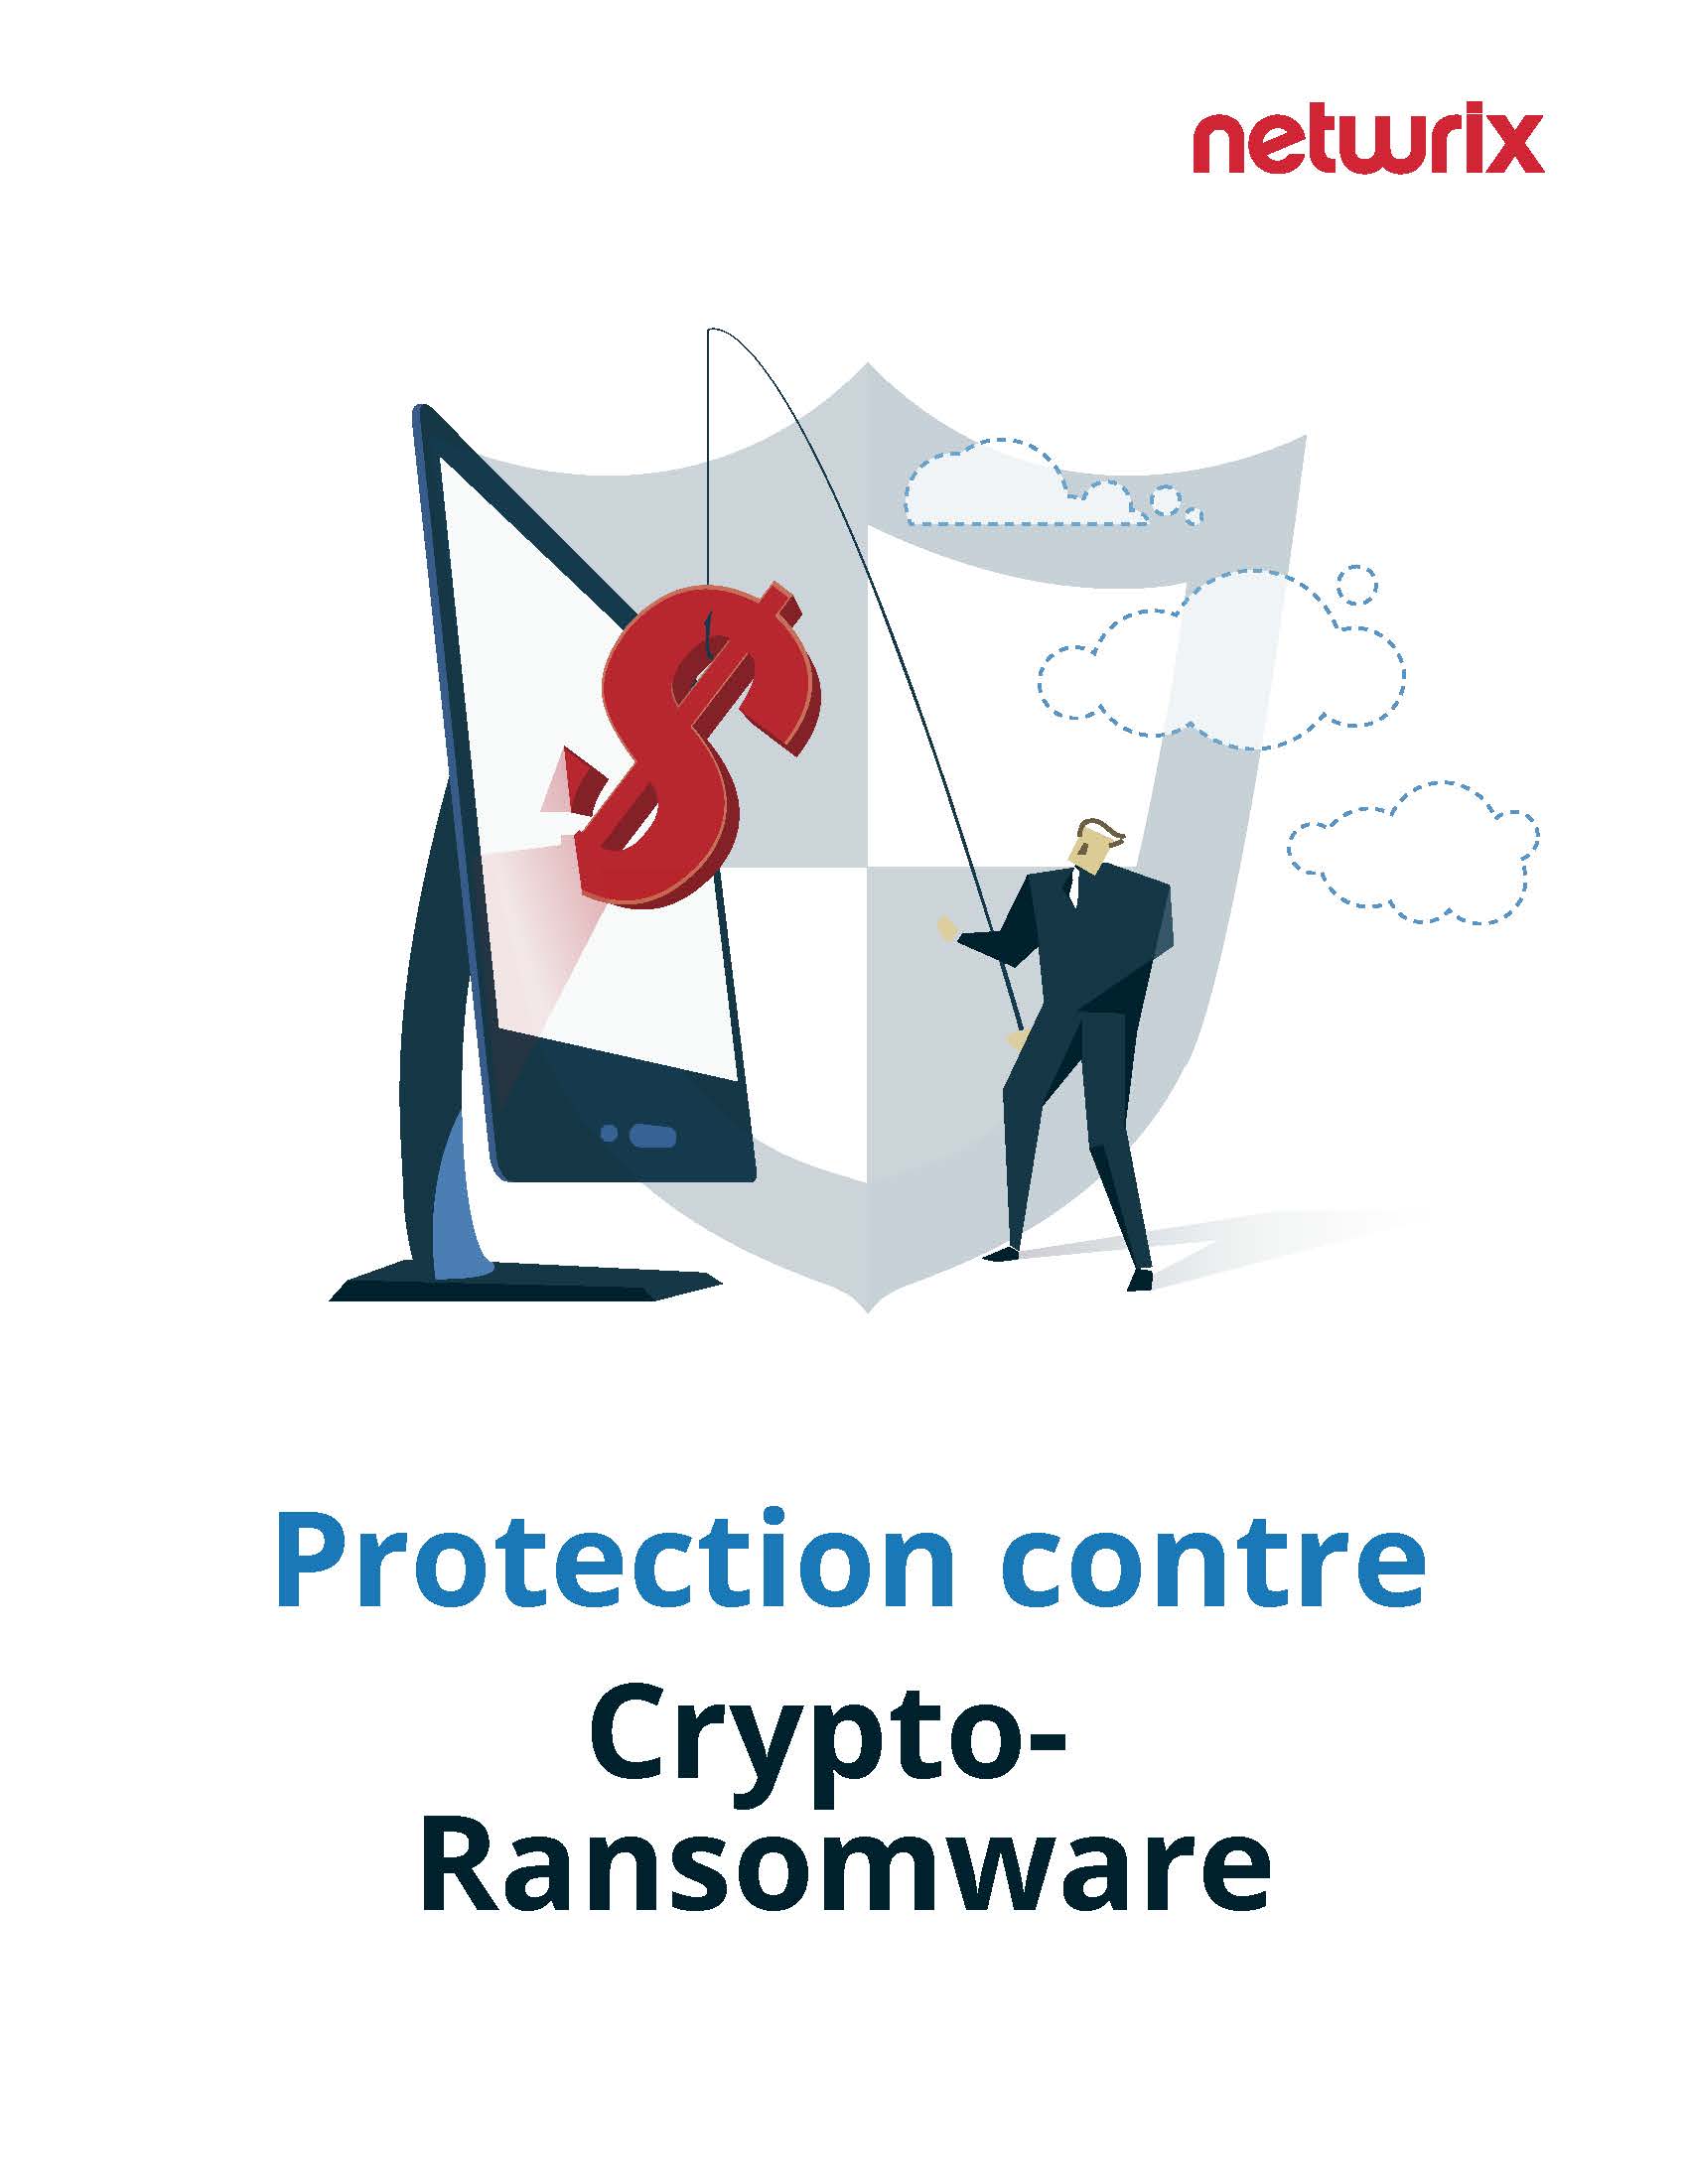 Protection contre Crypto-Ransomware